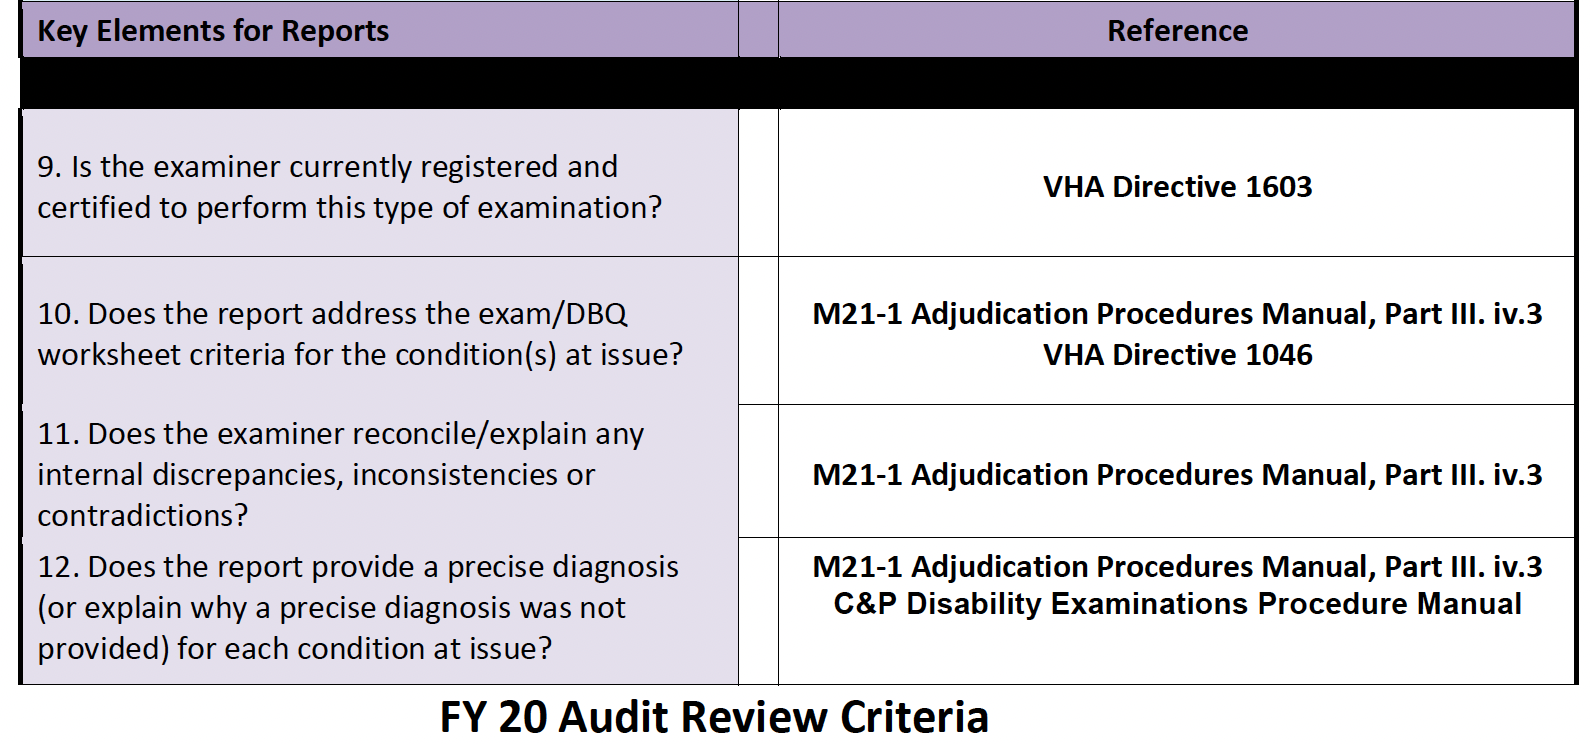 FY20 Audit Review Tool screen shot questions 9-12